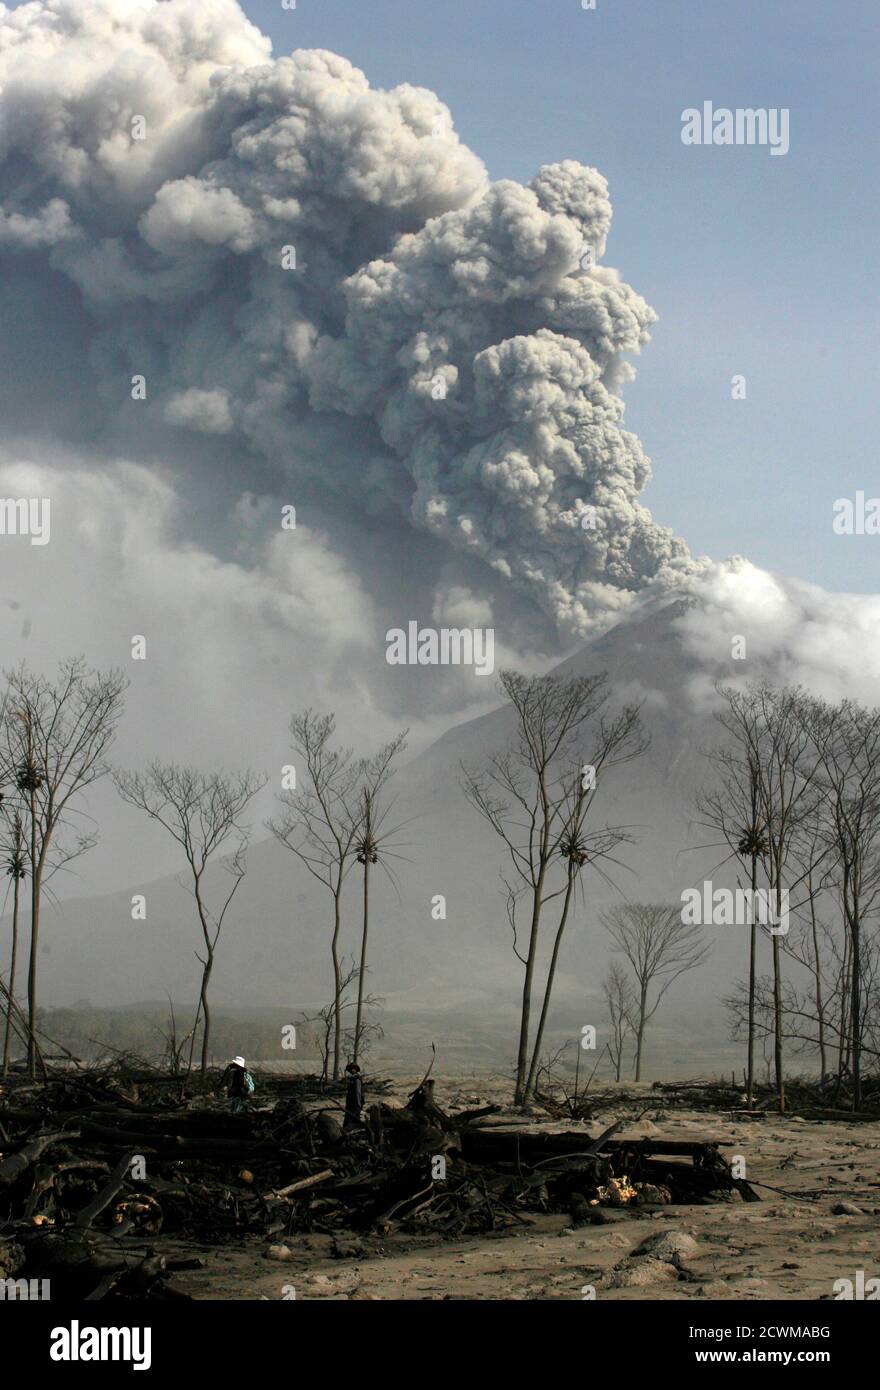 Eruption of Mount Merapi is seen from Kalitengah village in the Sleman district of Indonesia's central Java province November 10, 2010. Mount Merapi showed lethargic signs on Wednesday but authorities would not lower down its alert status because of its intense seismic activities, the head of the country's vulcanolology agency said. REUTERS/Sigit Pamungkas (INDONESIA - Tags: DISASTER ENVIRONMENT) Stock Photo